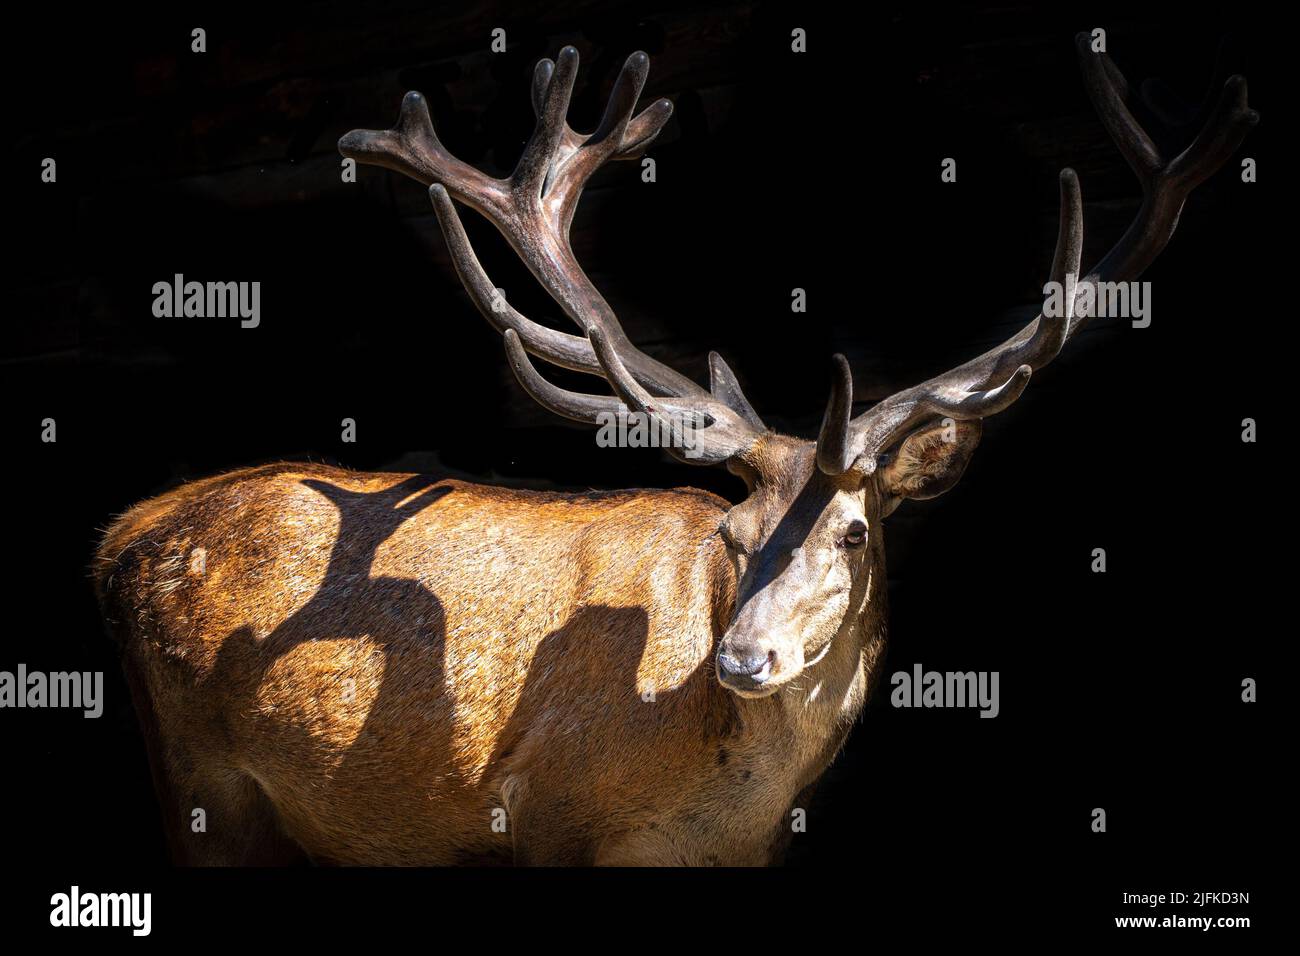 low key close-up portrait of a stag red deer with huge antlers Stock Photo